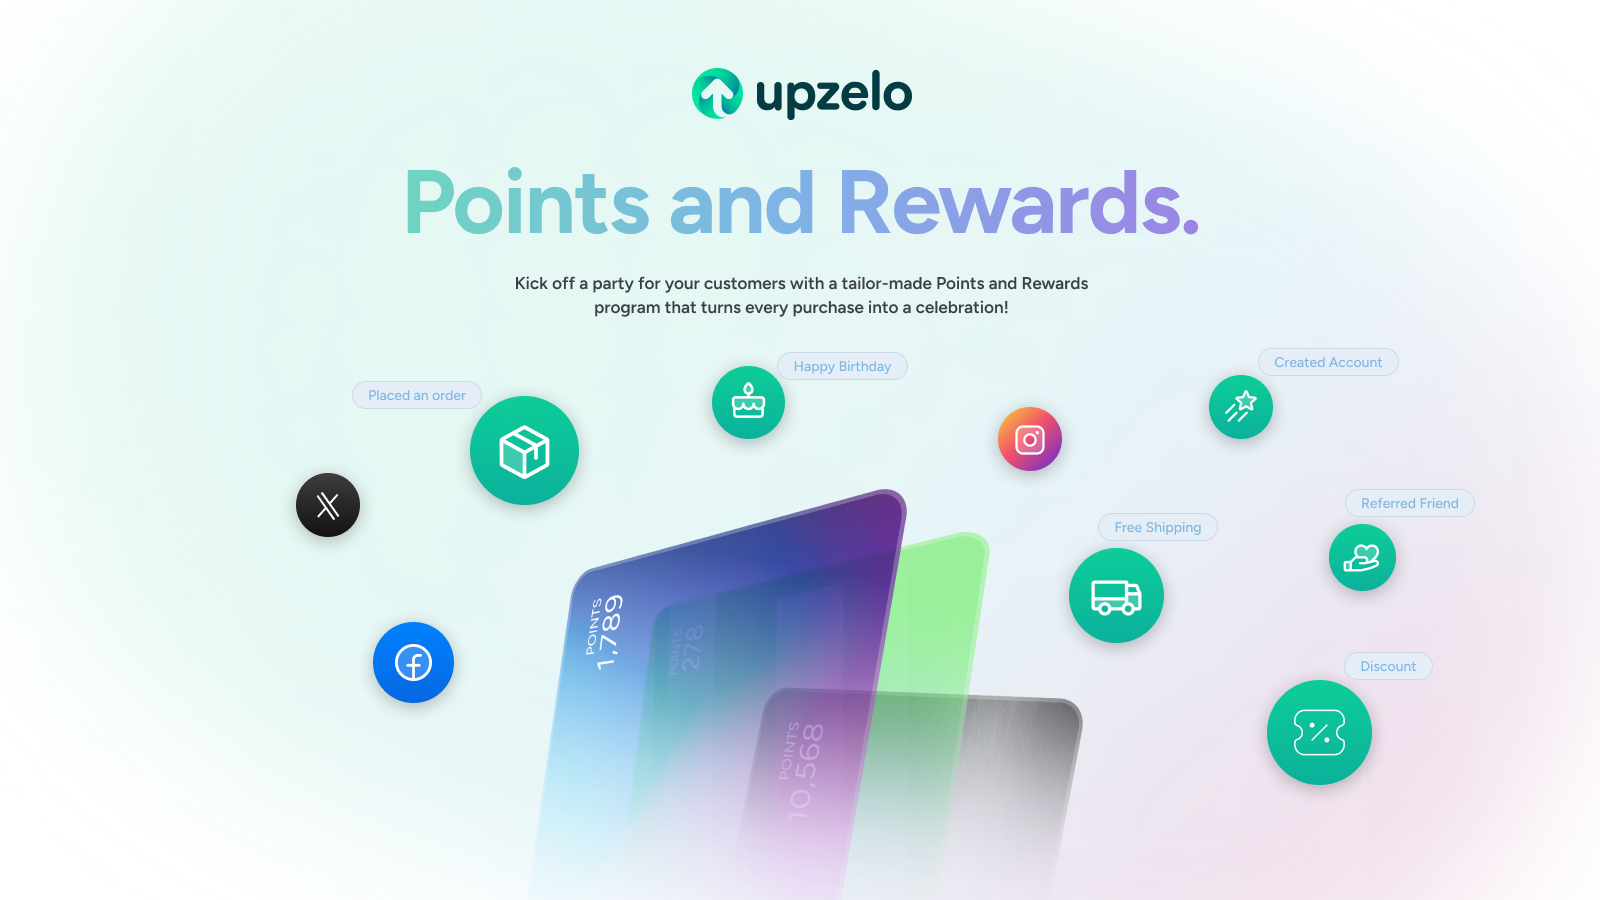 Points and Rewards. Kick off a party for your customers with a tailor-made Points and Rewards program that turns every purchase into a celebration!